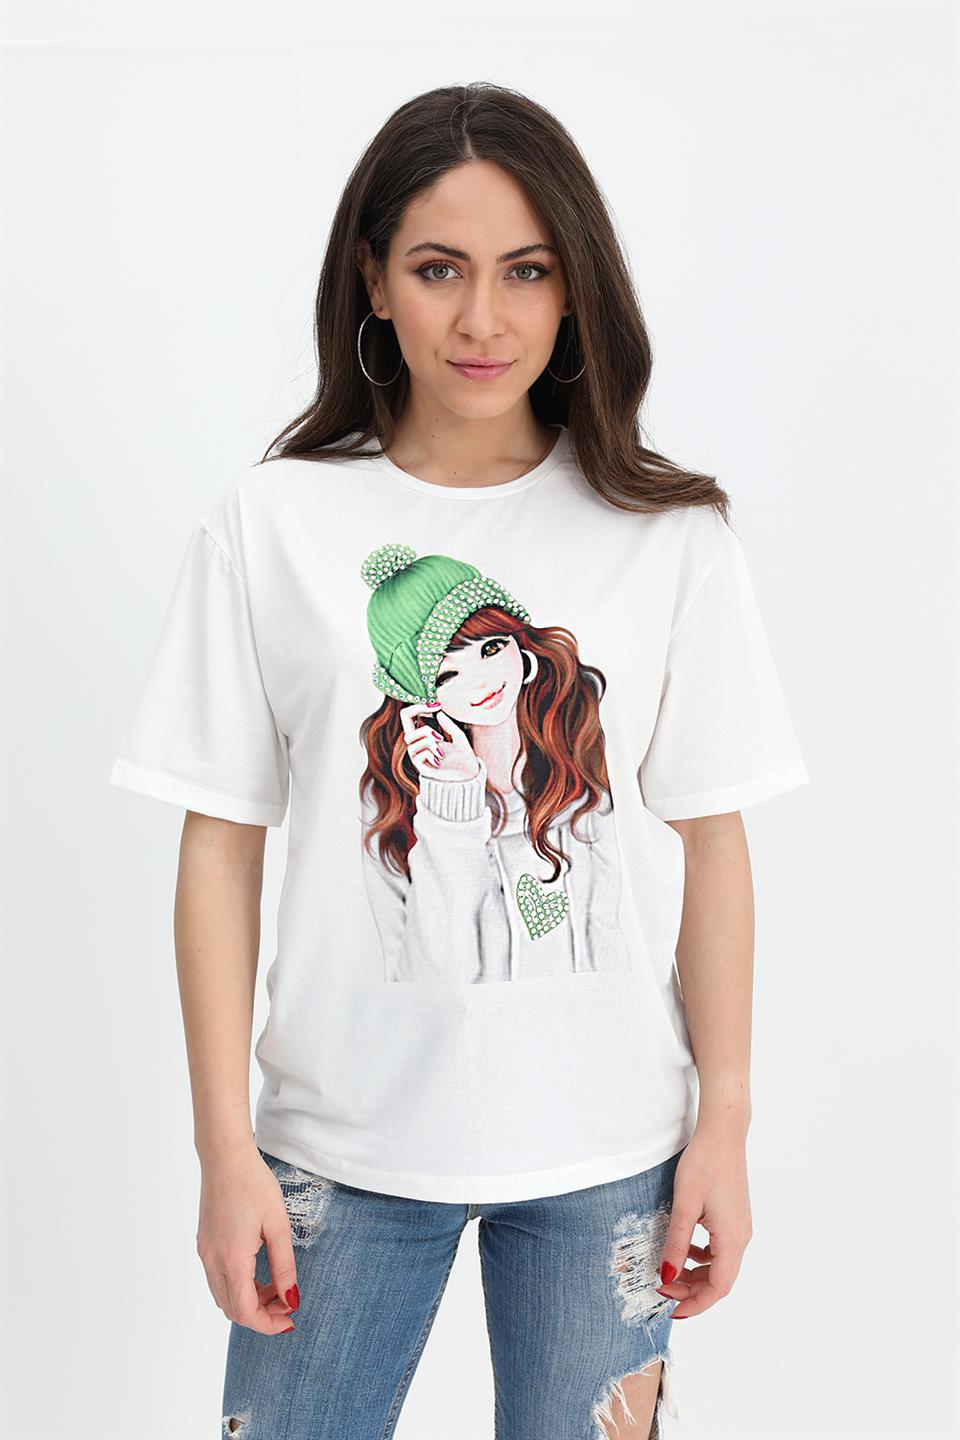 Women's T-shirt Girl Printed Stone Embroidered - Green - STREETMODE ™